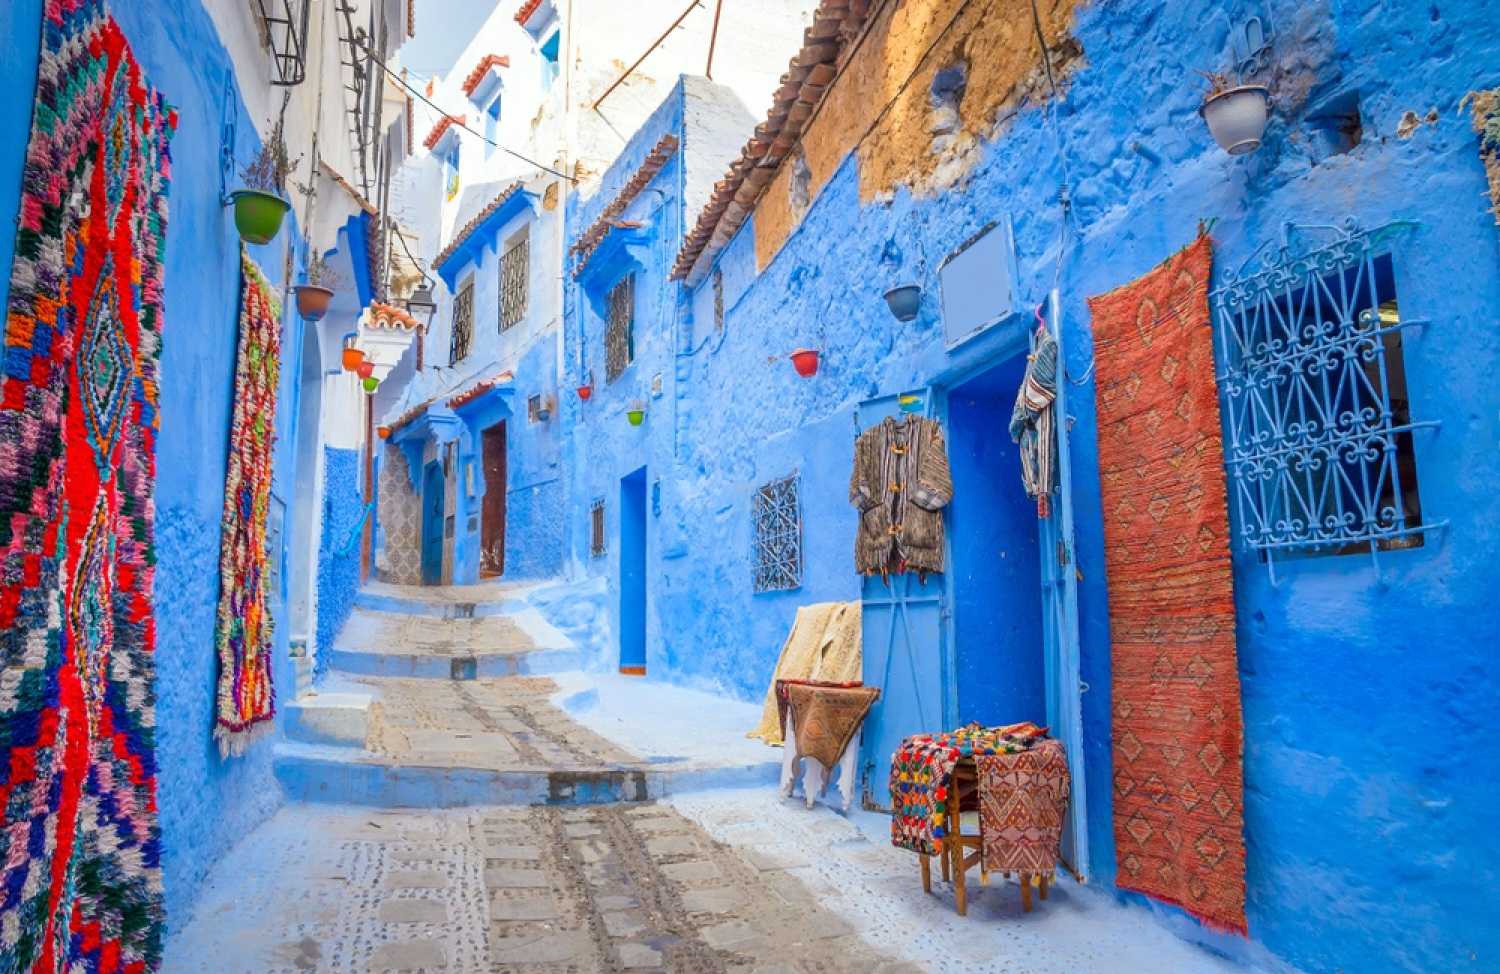 Day 13: Exploring Chefchaouen